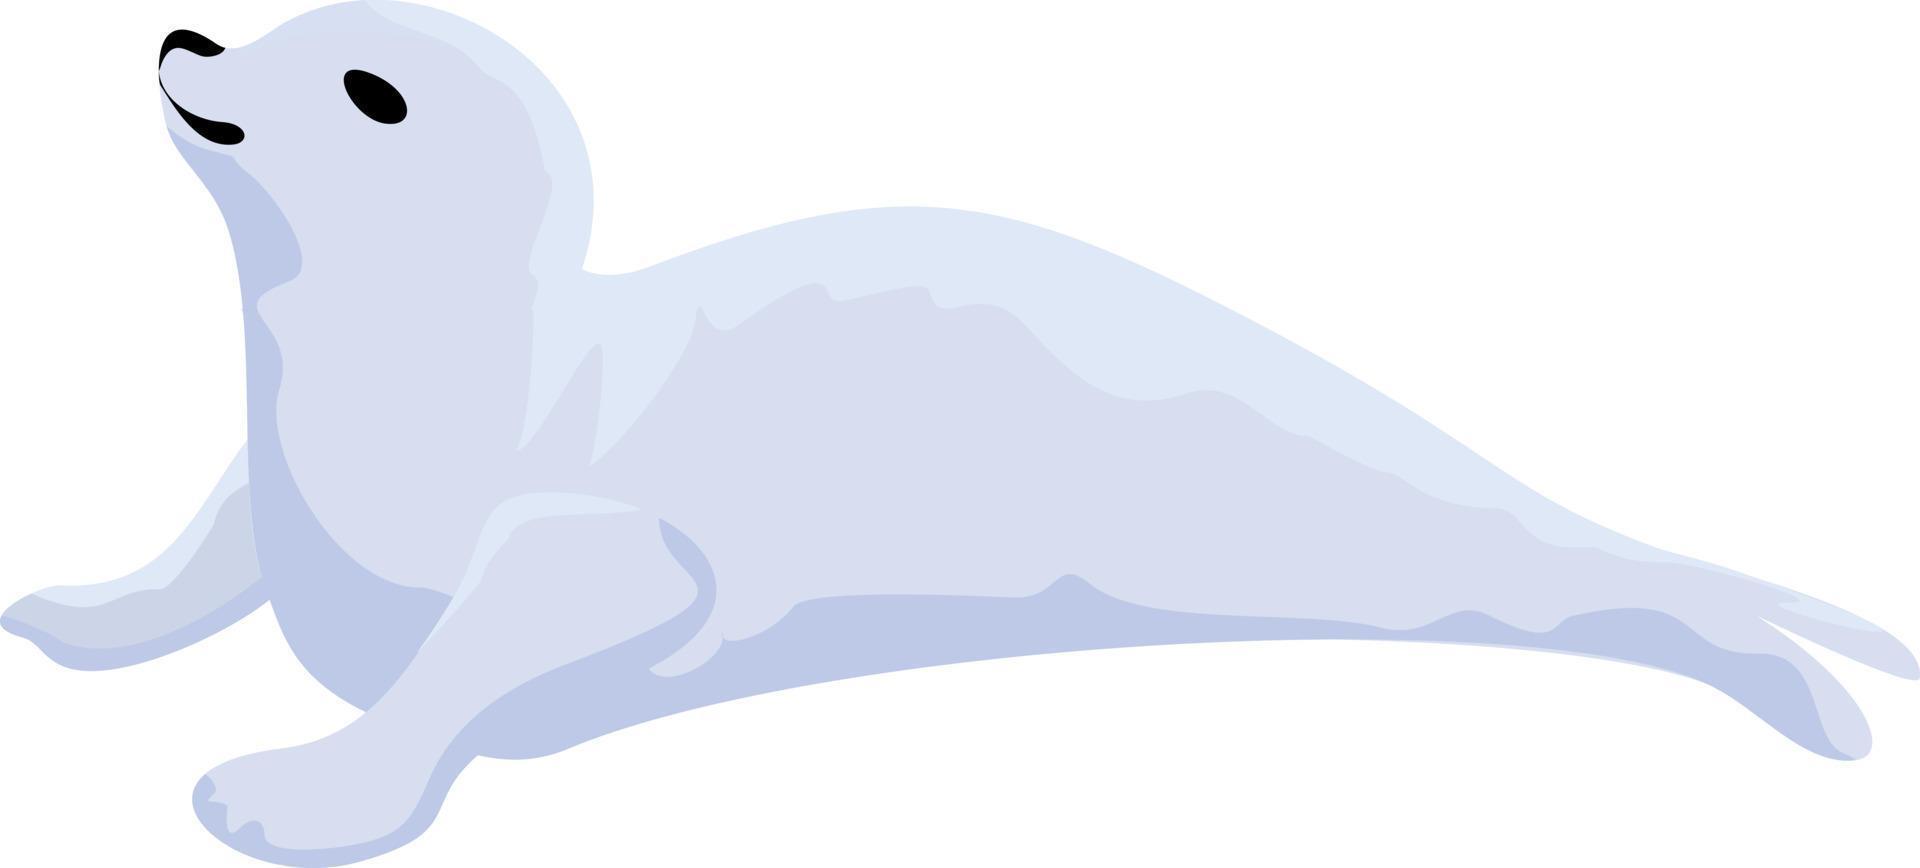 Seal animal. Seal lays. The seal has its head up and is looking sideways vector